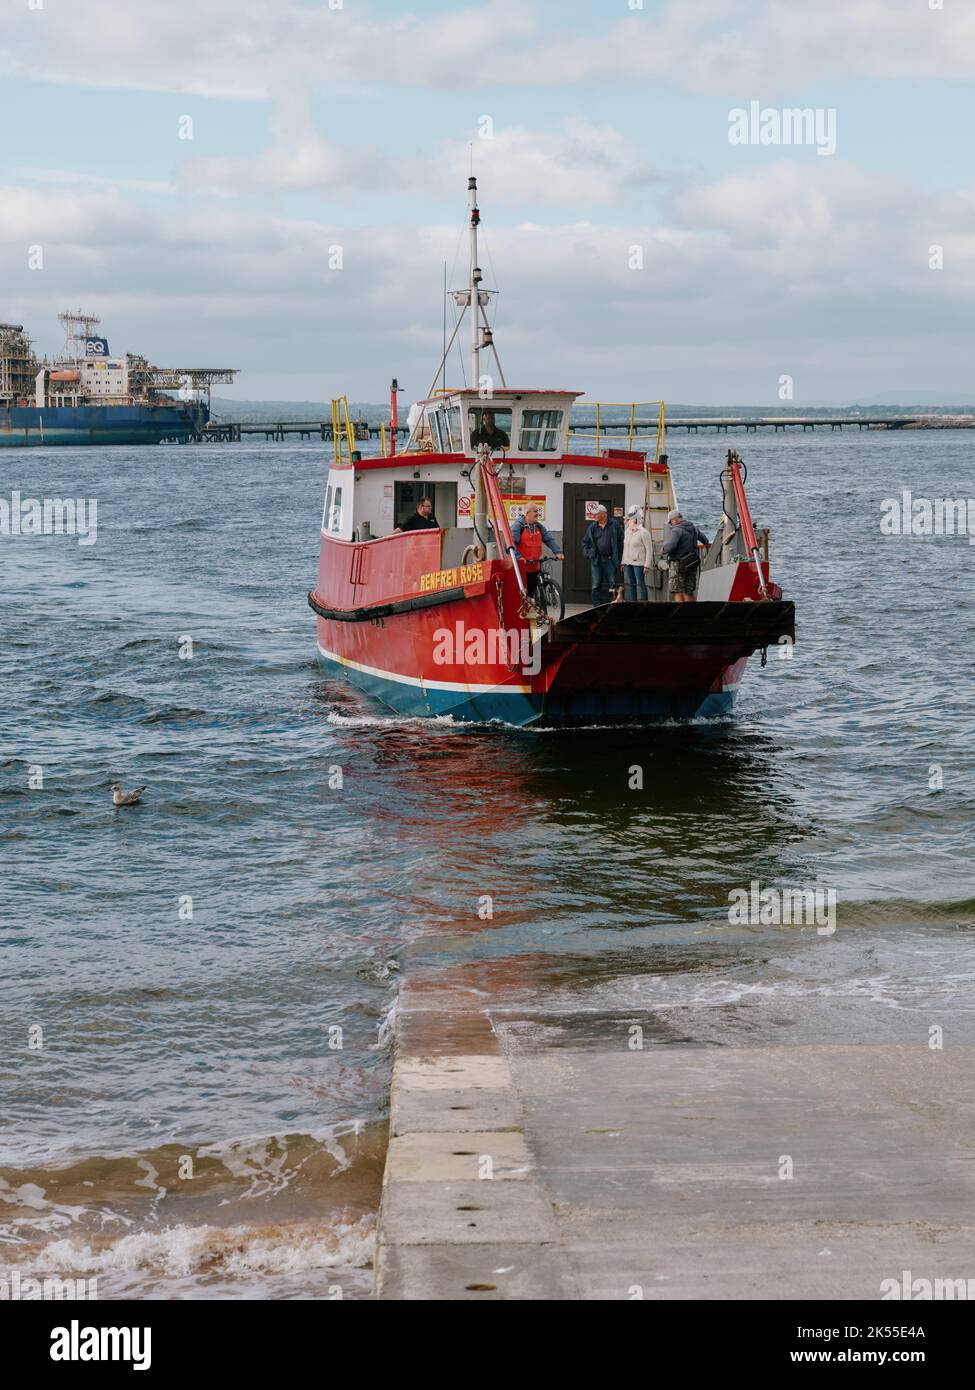 The Cromarty-Nigg highland ferry service with foot passengers arriving in Cromarty Harbour, Cromarty, Ross & Cromarty, Highland, Scotland UK Stock Photo